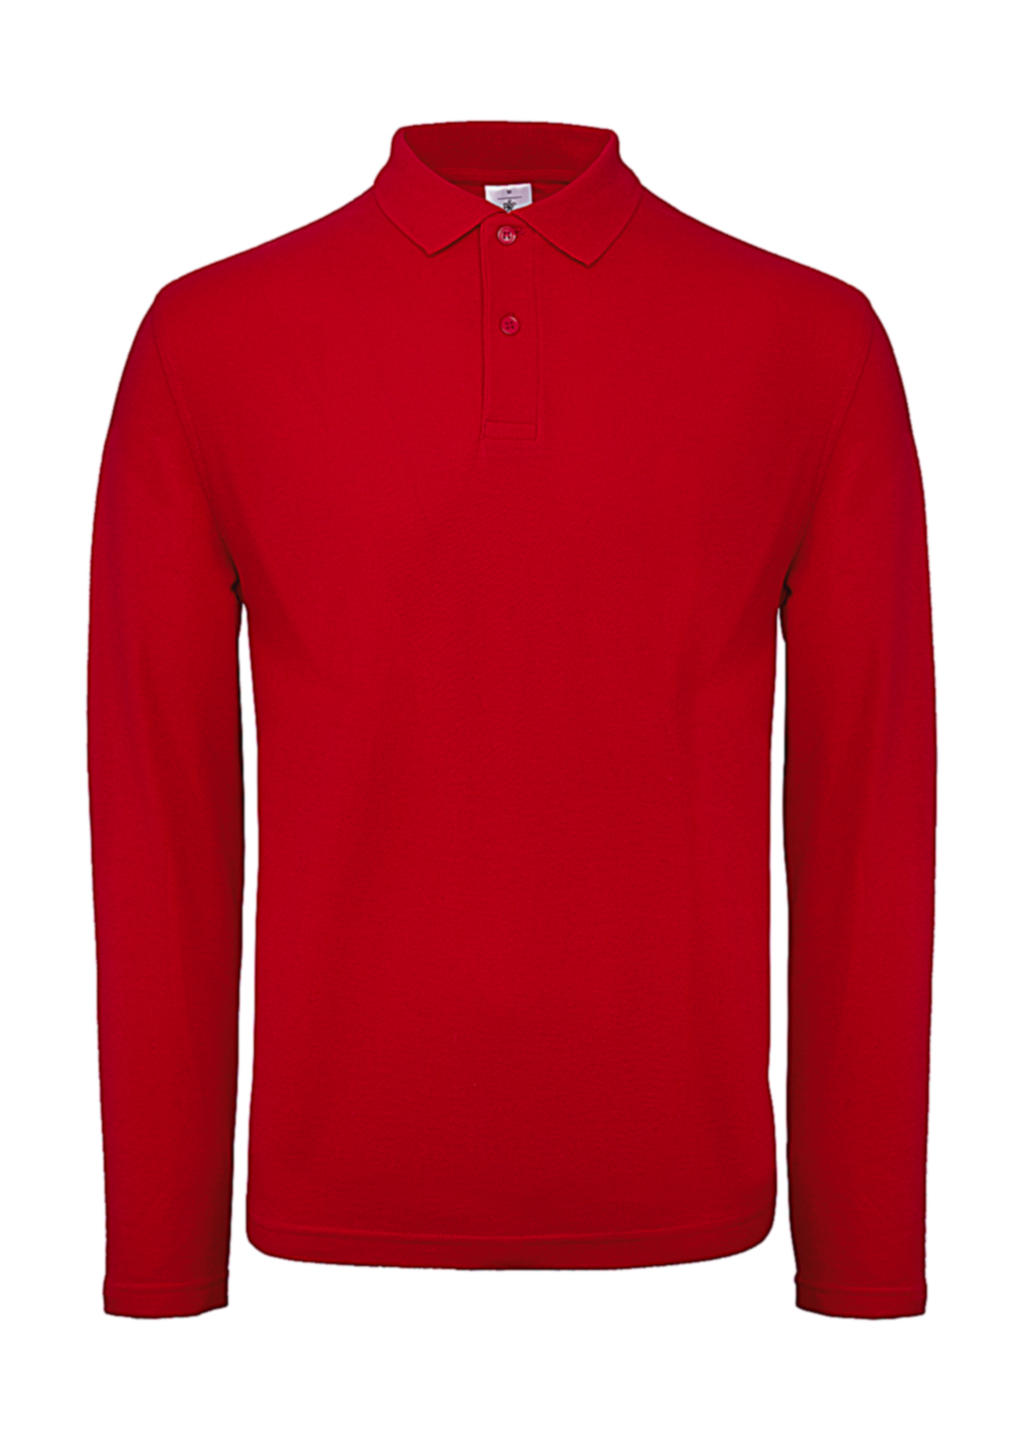  ID.001 LSL Polo in Farbe Red